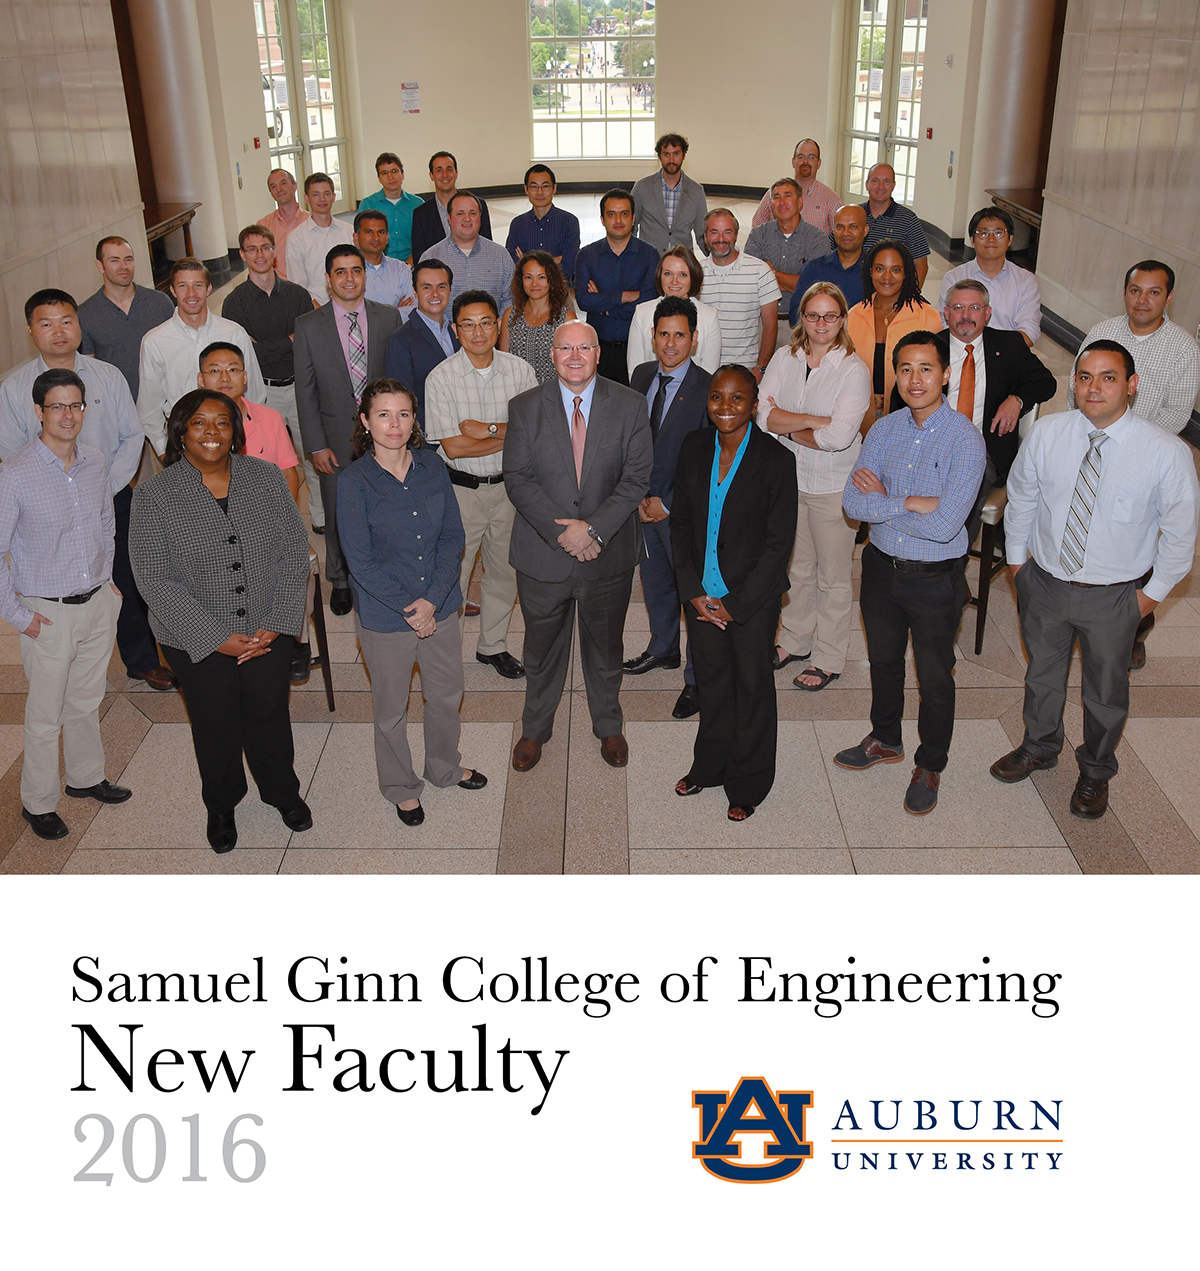 Samuel Ginn College of Engineering New Faculty 2016